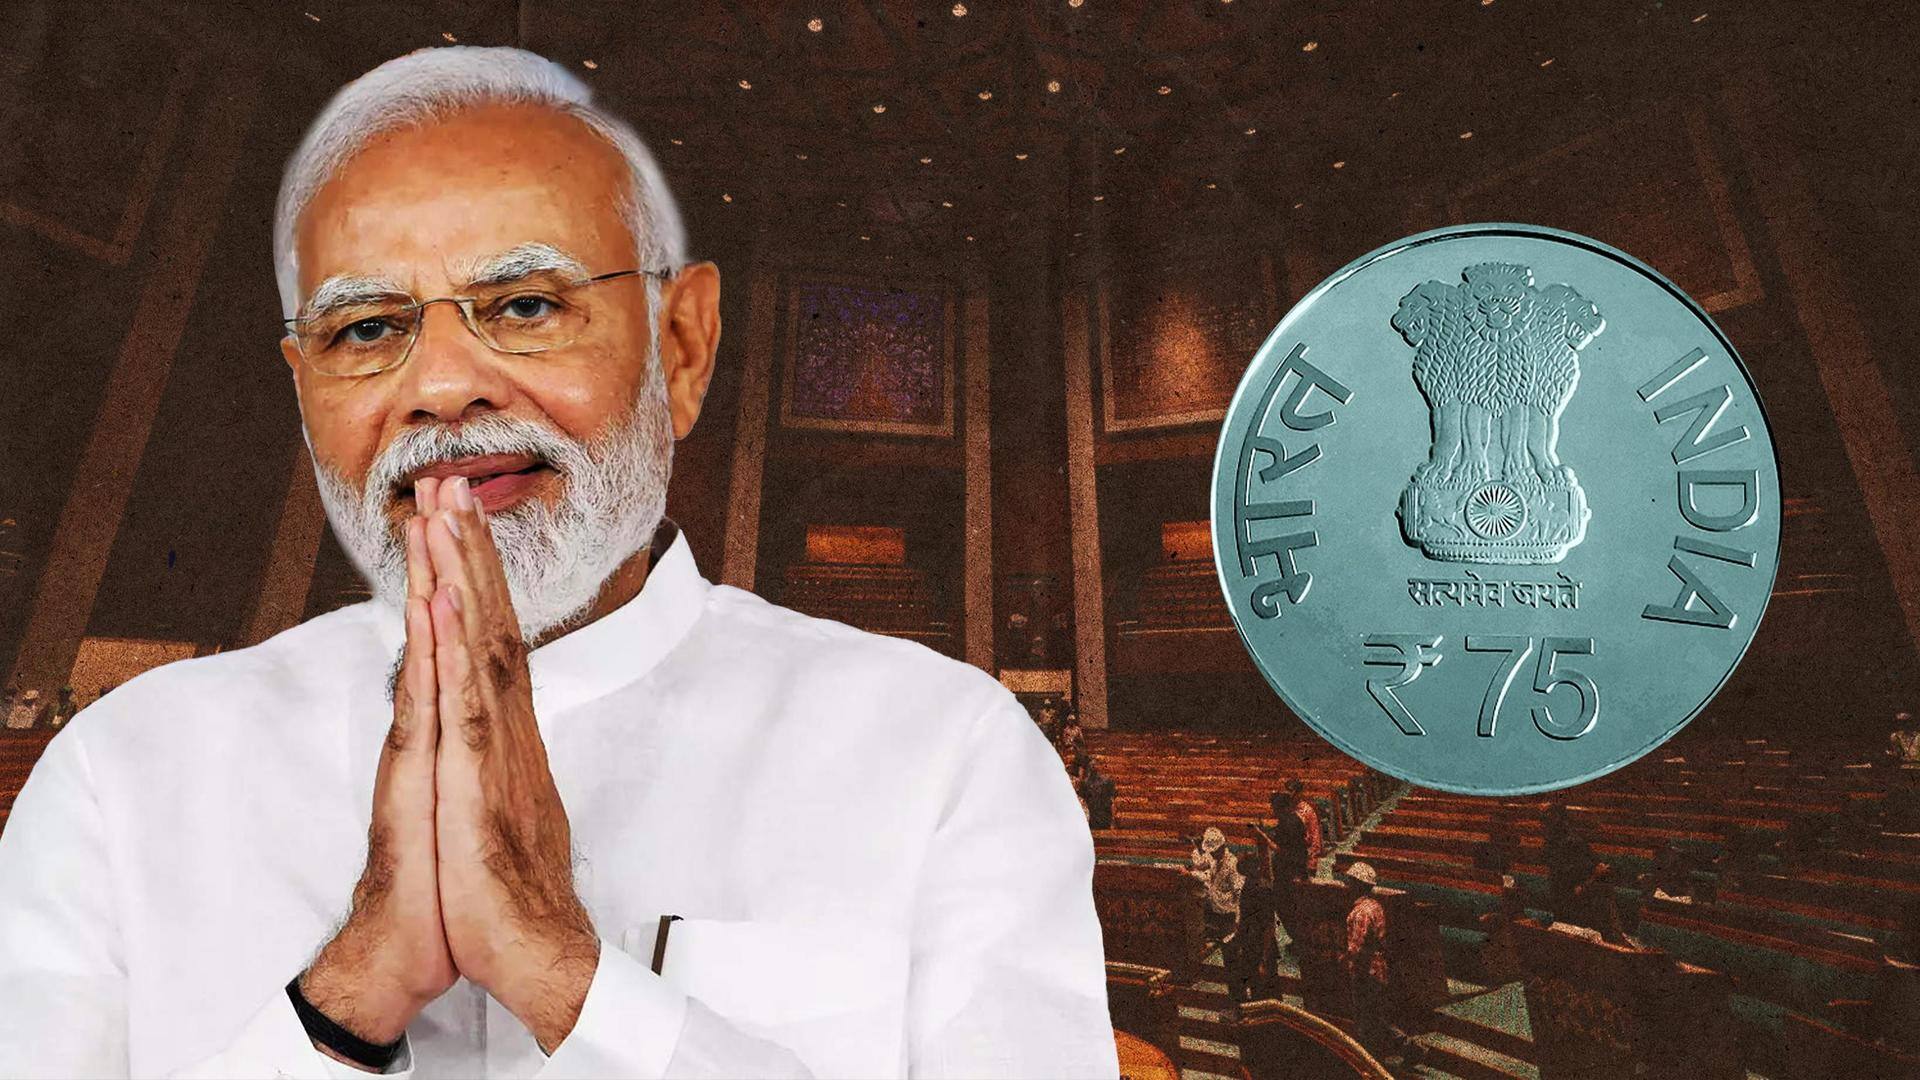 New Parliament inauguration: Modi releases special stamp, Rs. 75 coin